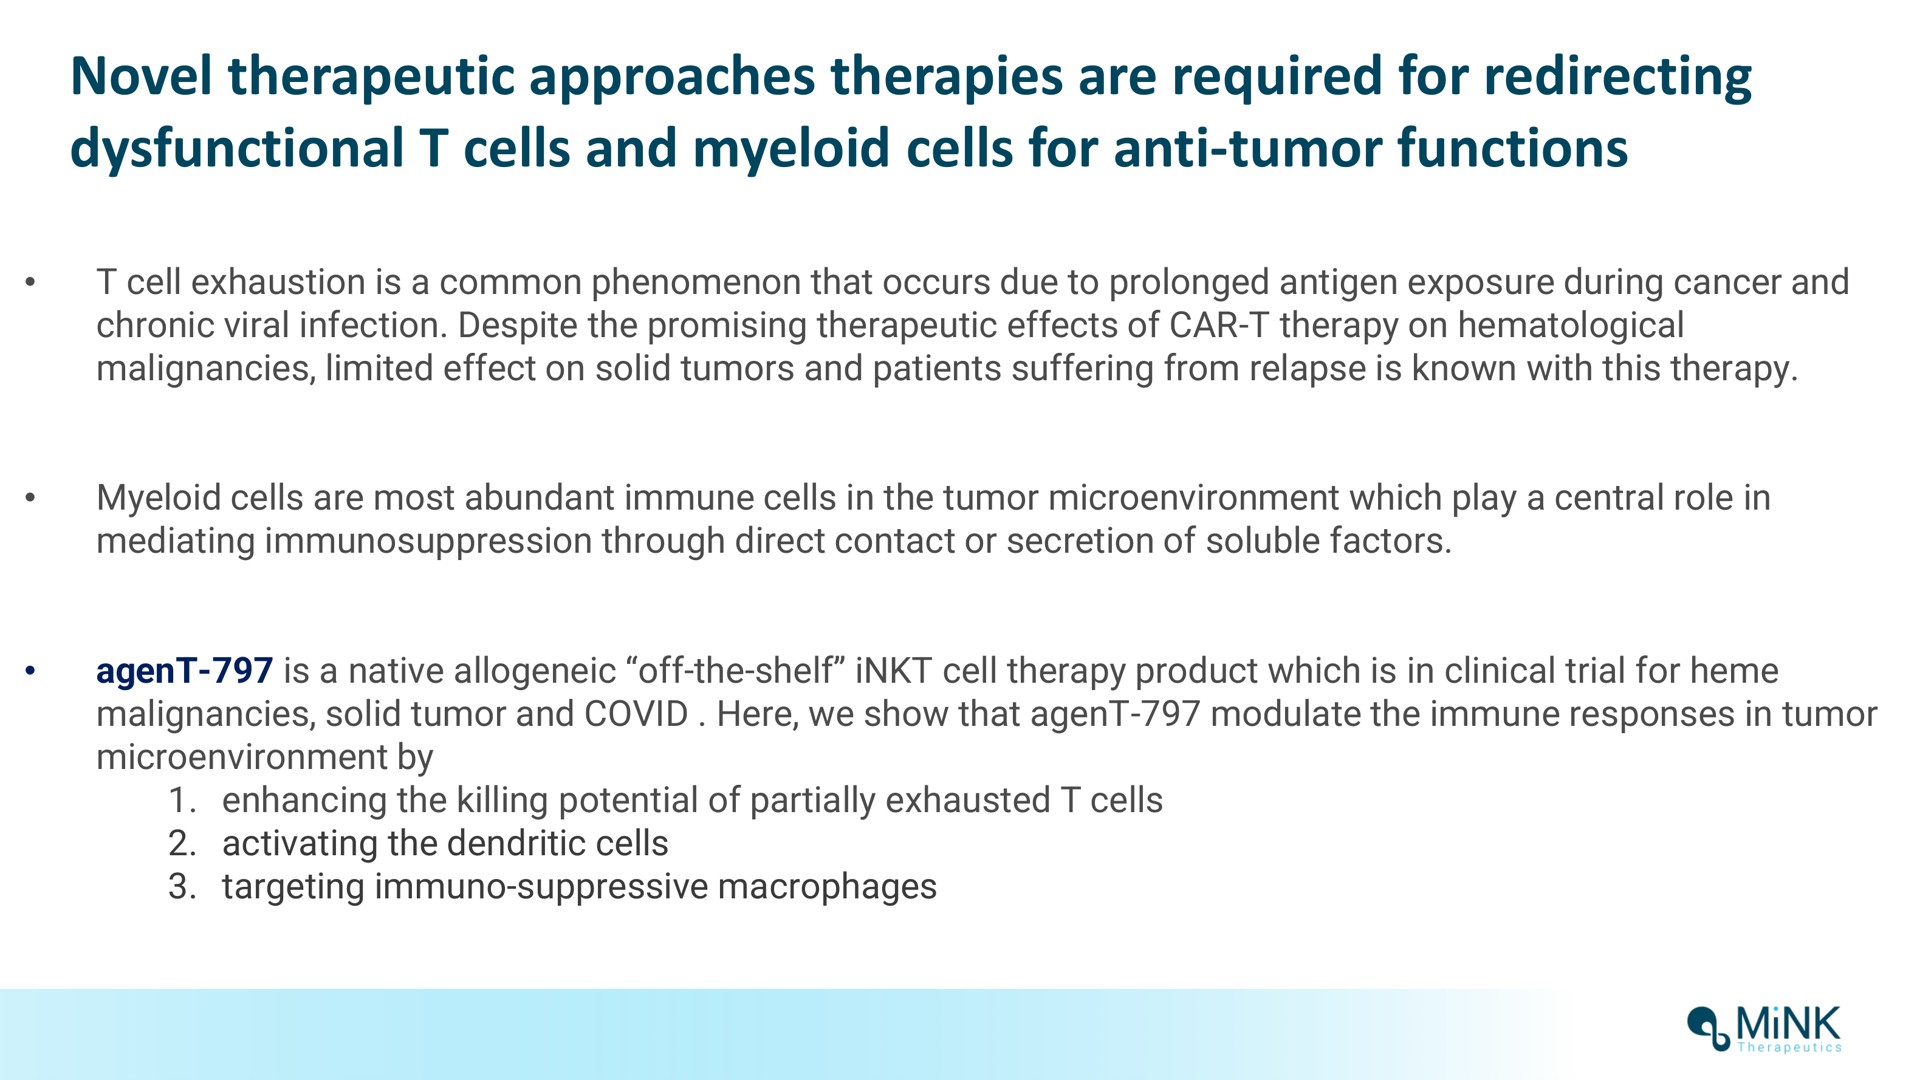 novel therapeutic approaches therapies are required for redirecting cells and myeloid cells for anti tumor functions mink | Mink Therapeutics